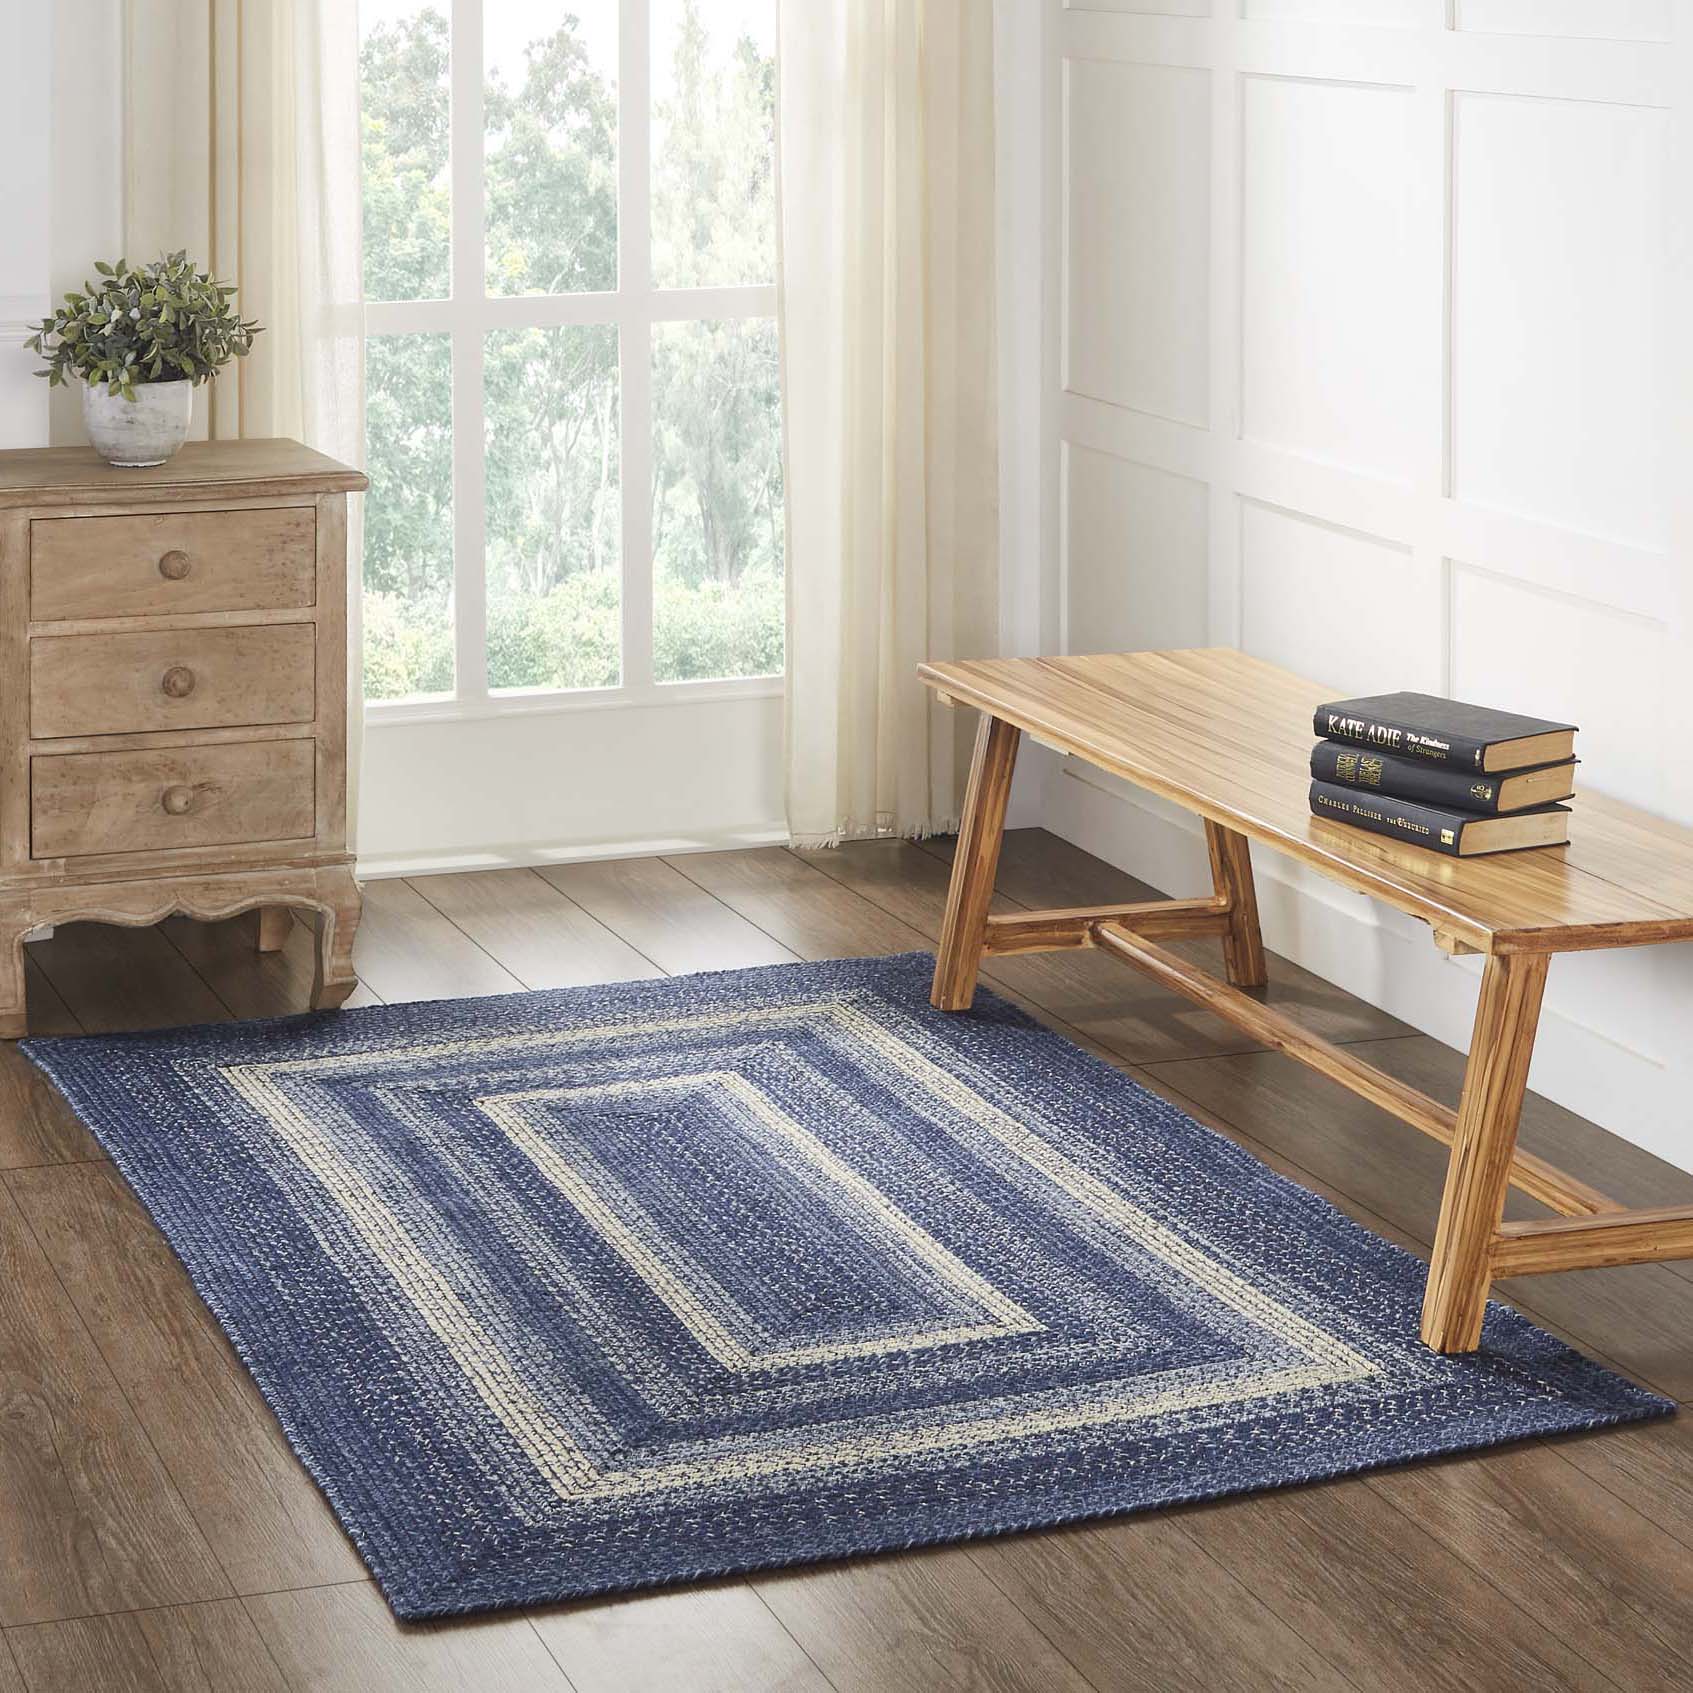 Great Falls Blue Jute Braided Rug Rect with Rug Pad 4'x6' VHC Brands